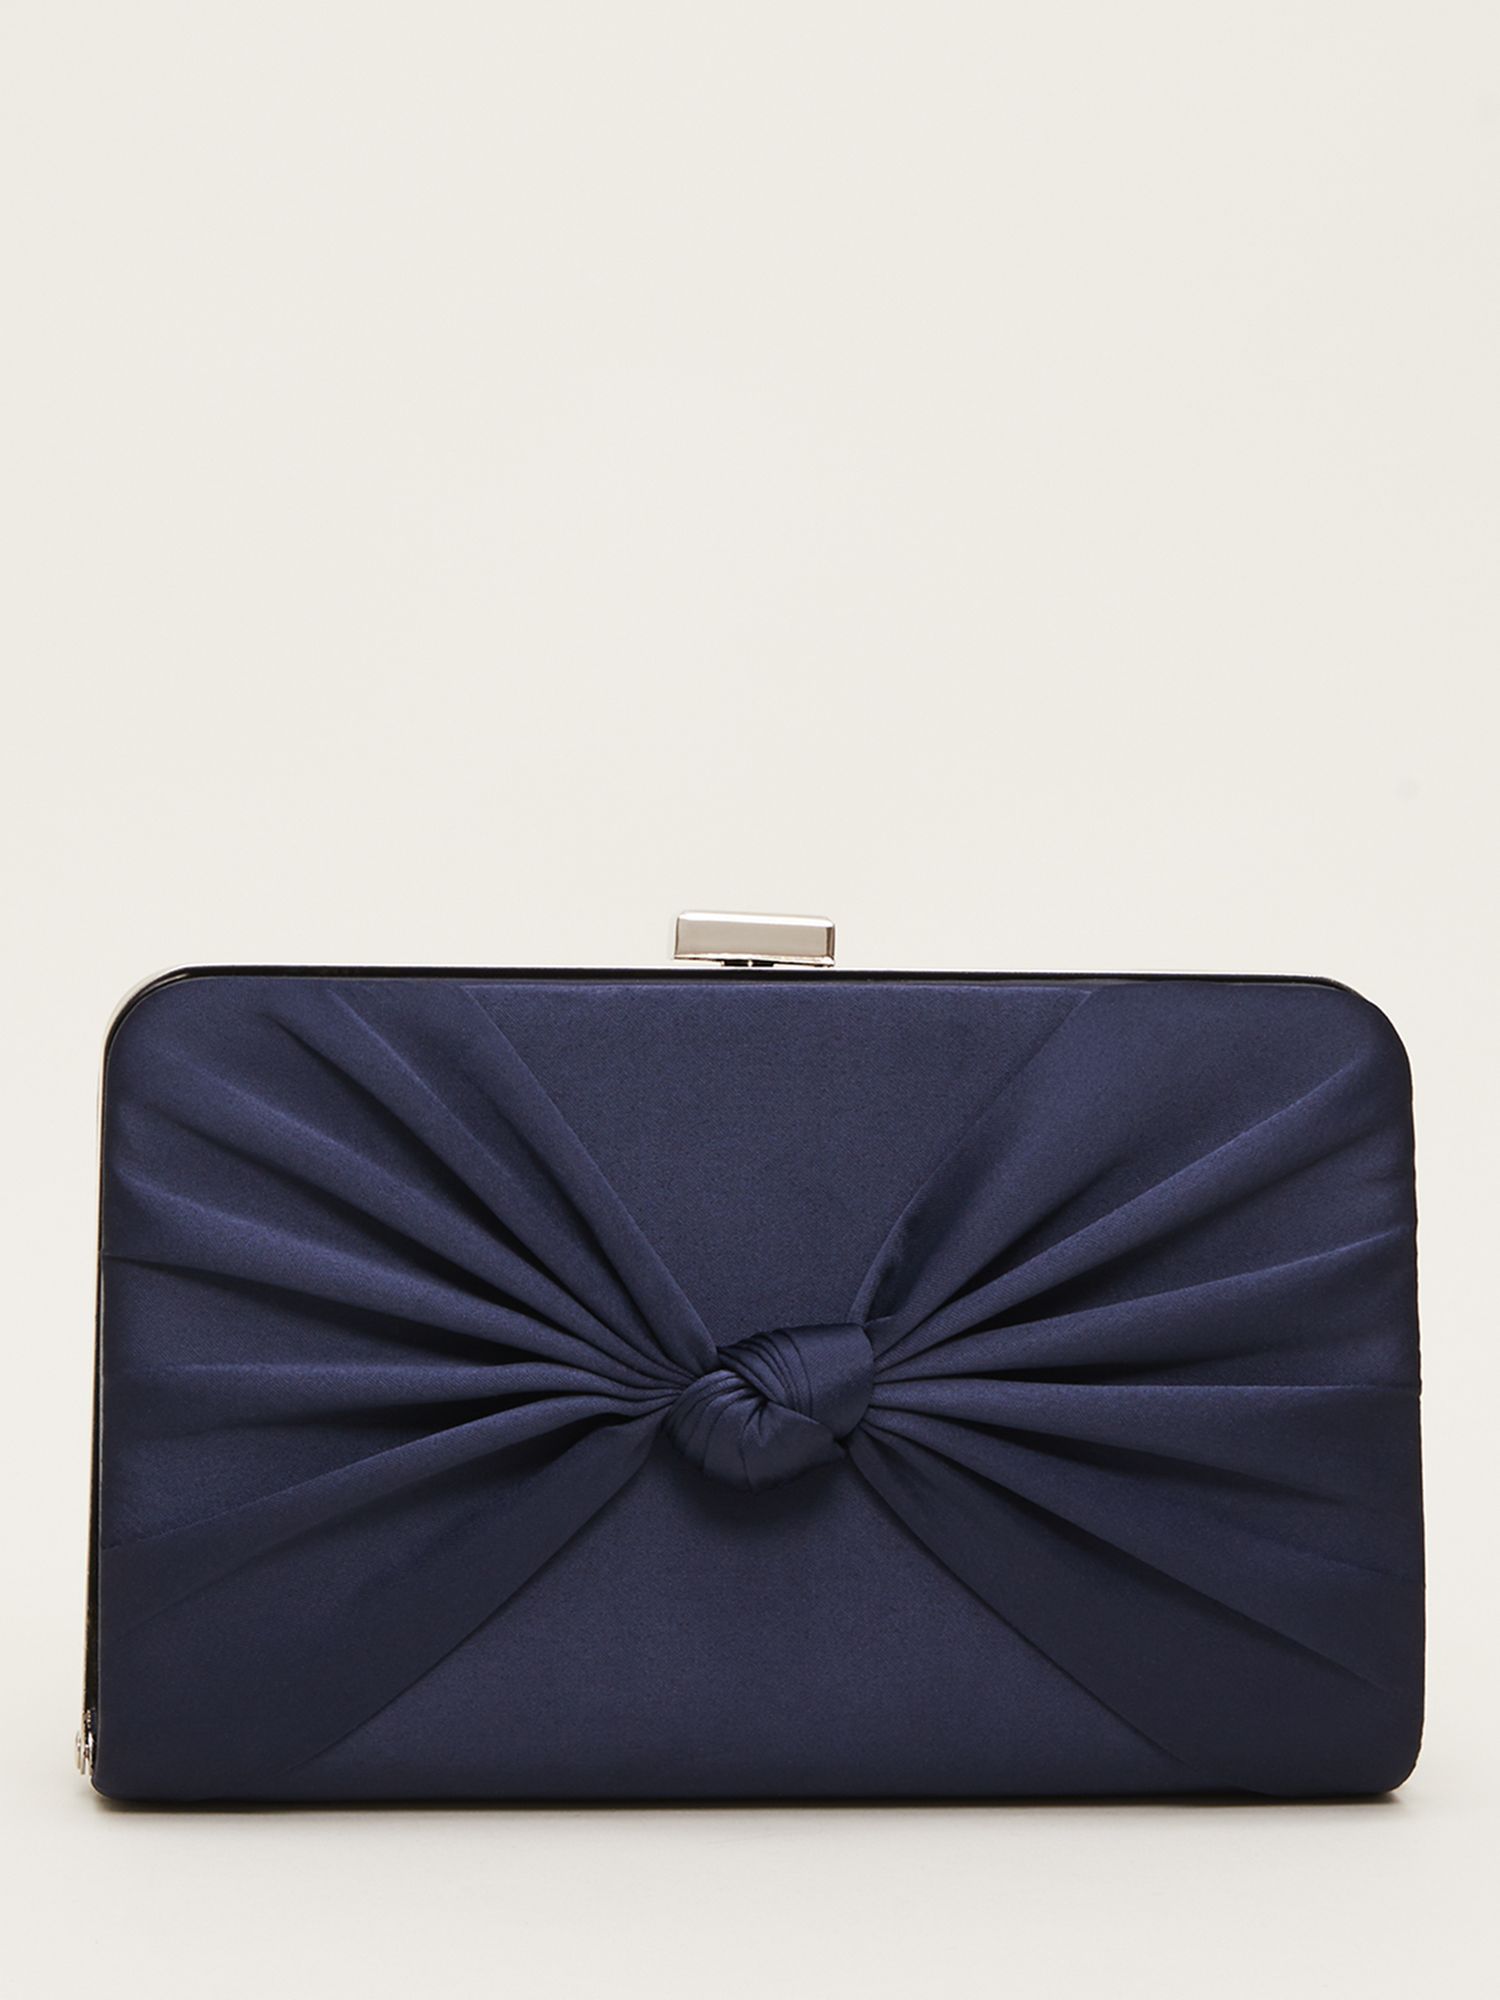 Phase Eight Satin Knot Front Box Clutch Bag, Navy, One Size